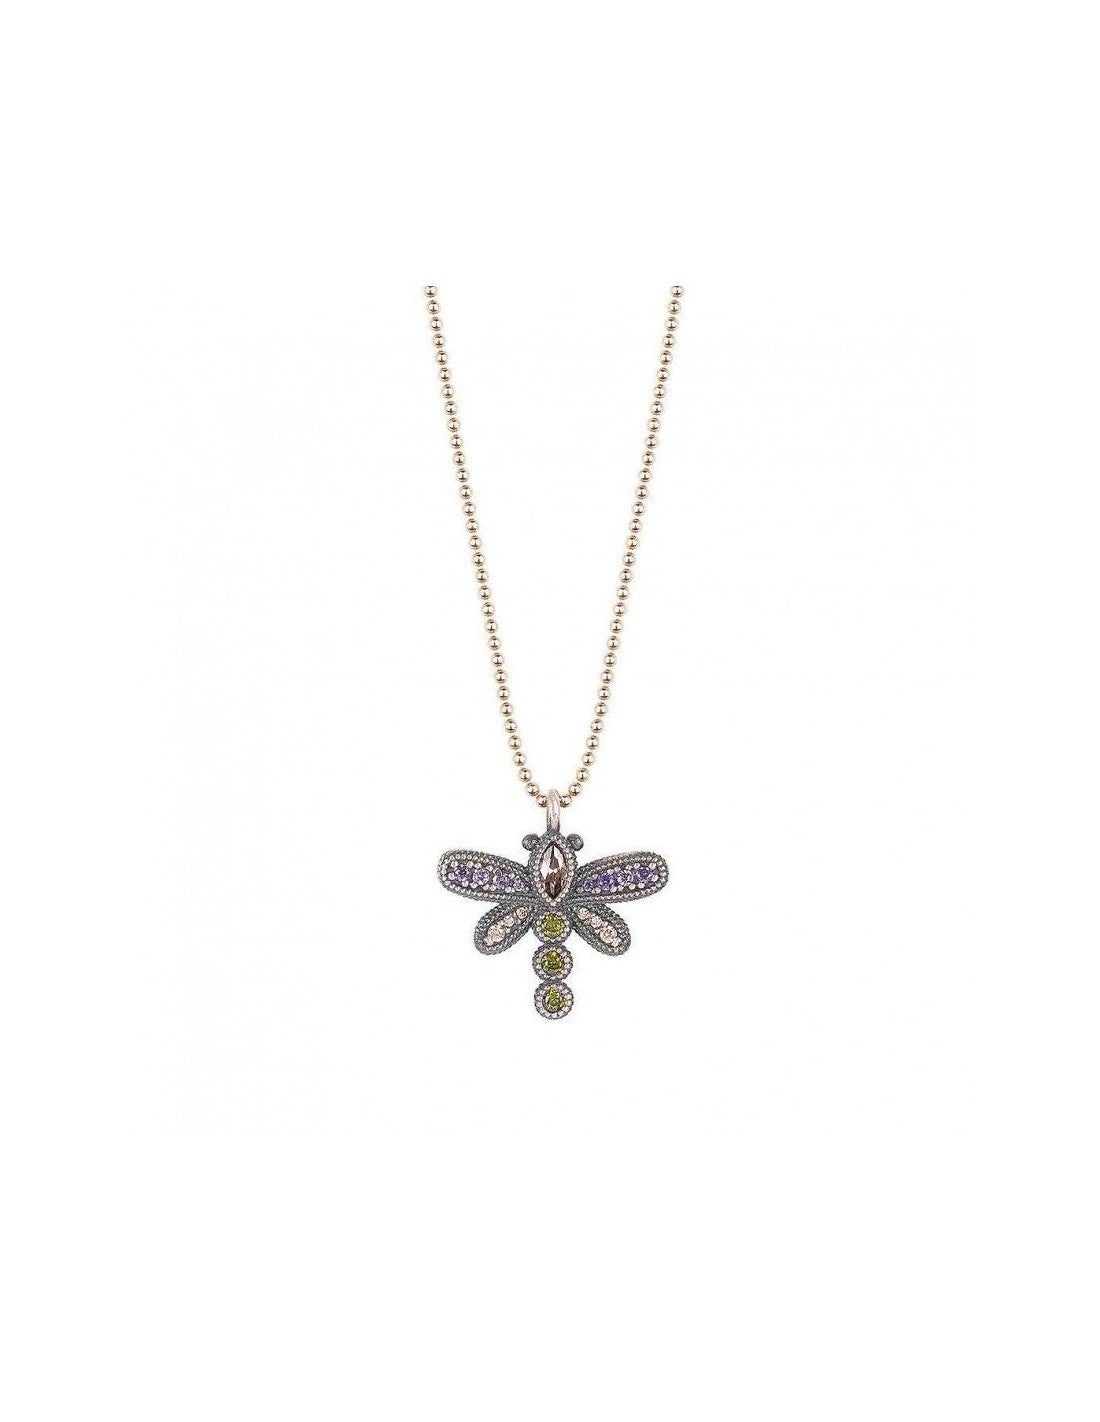 Dragonfly Necklace | Sunfield | Luby 